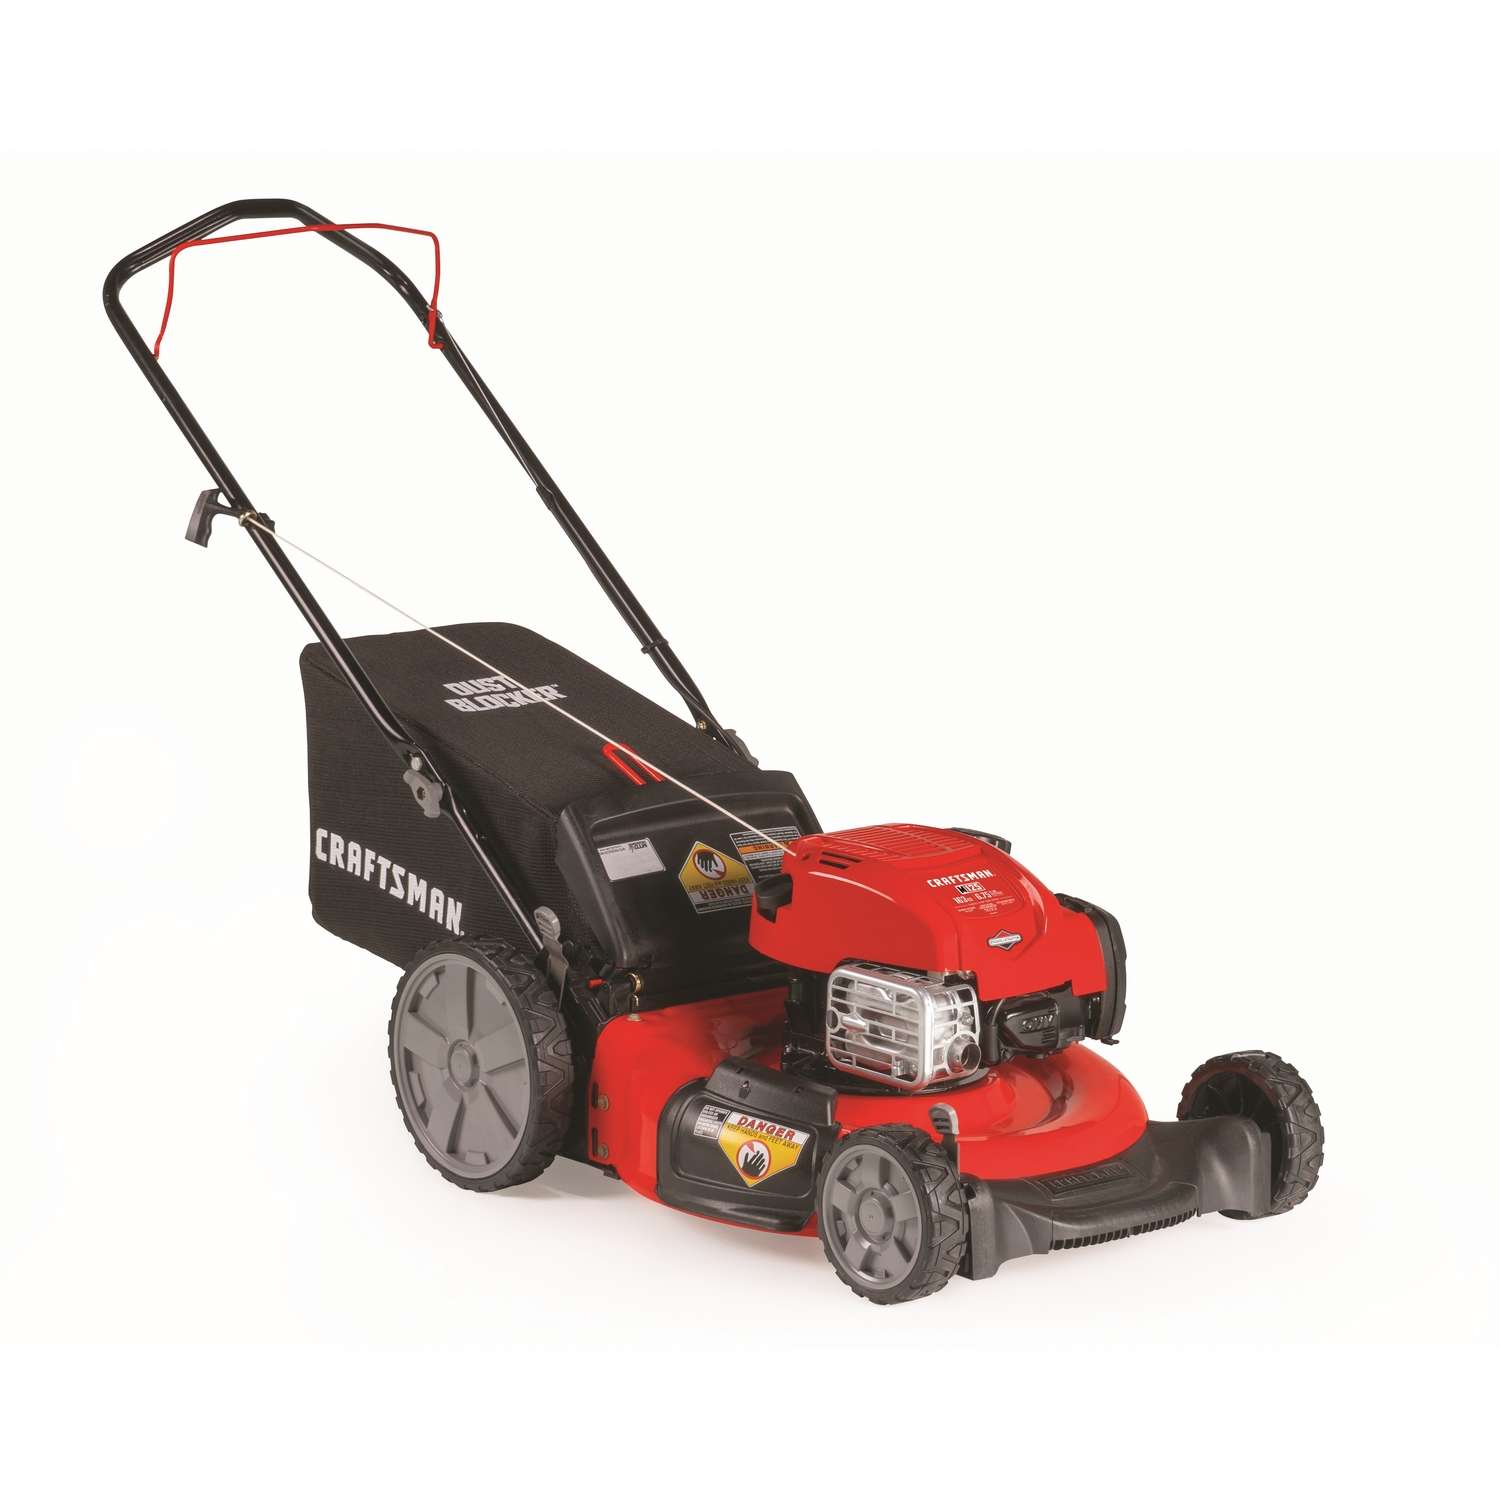 Craftsman M125 21 in. 163 cc Gas Lawn Mower Ace Hardware